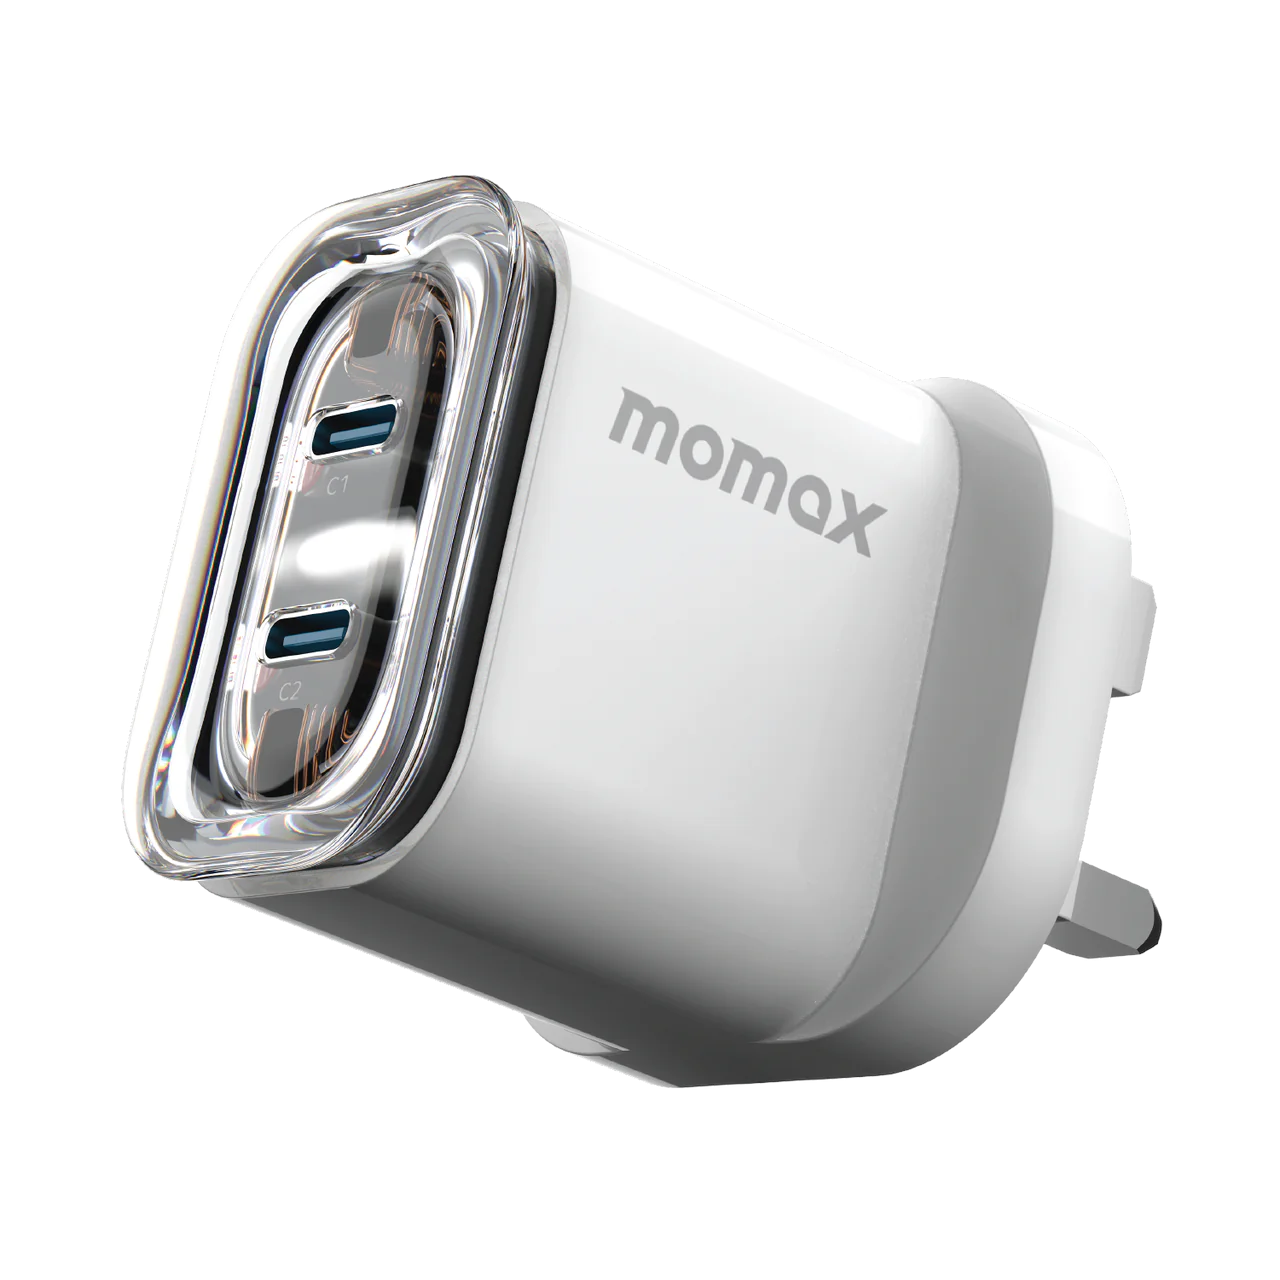 MOMAX 1-Charge Flow GaN Usb Charger (35W, 2port, PD, QC3.0, 2xTypeC, White Clear) #UM51UKW